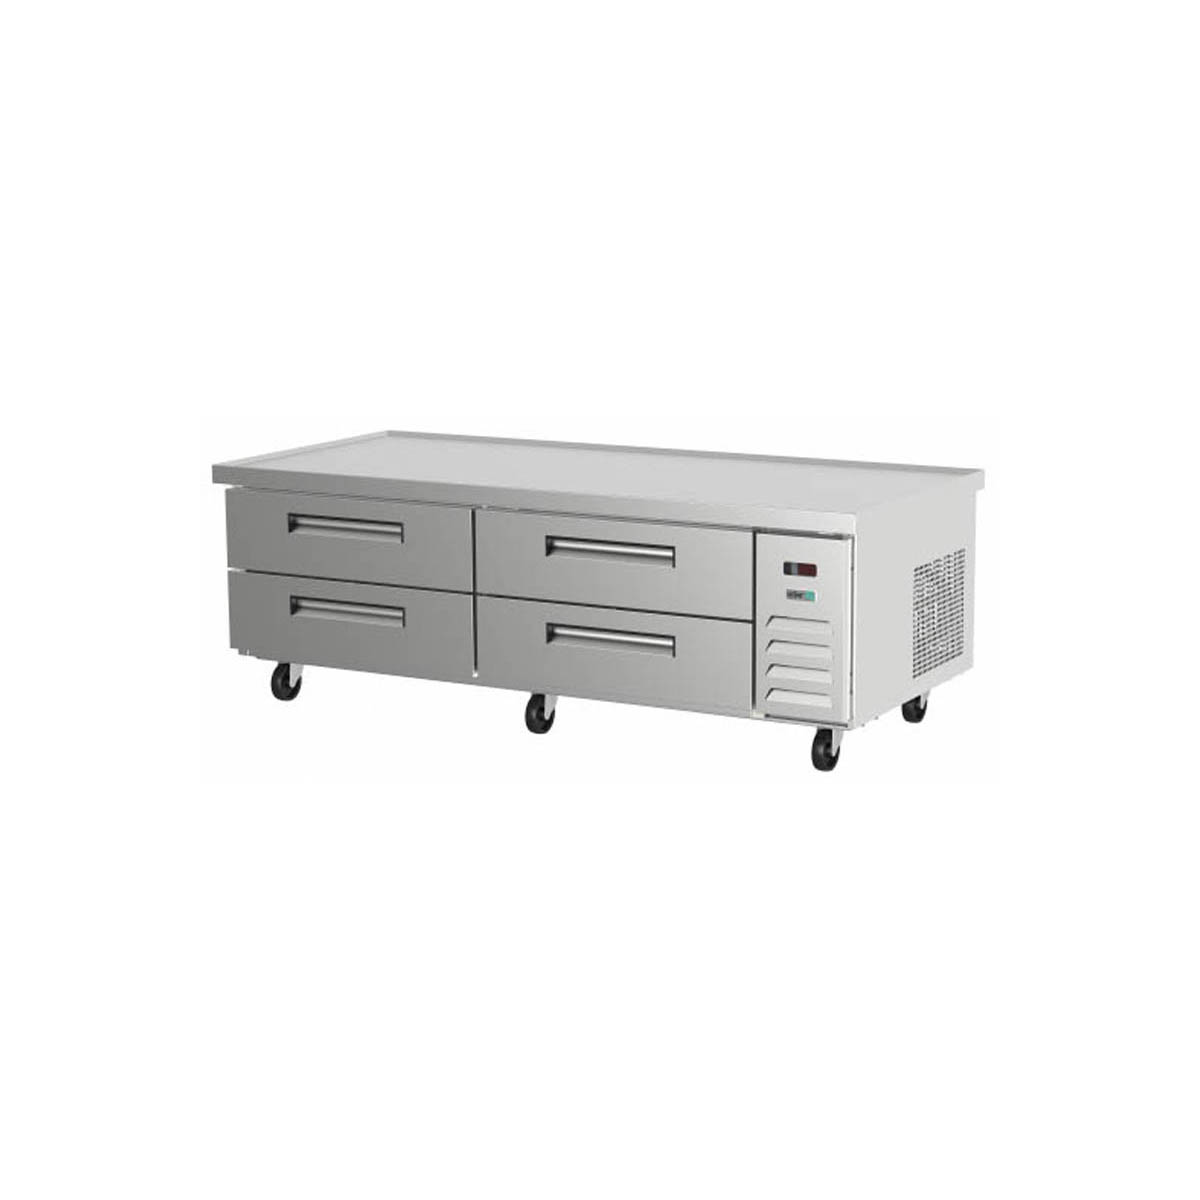 Asber ACBR-72 72″ 4 Drawers Chef Base Refrigerated Equipment Stand